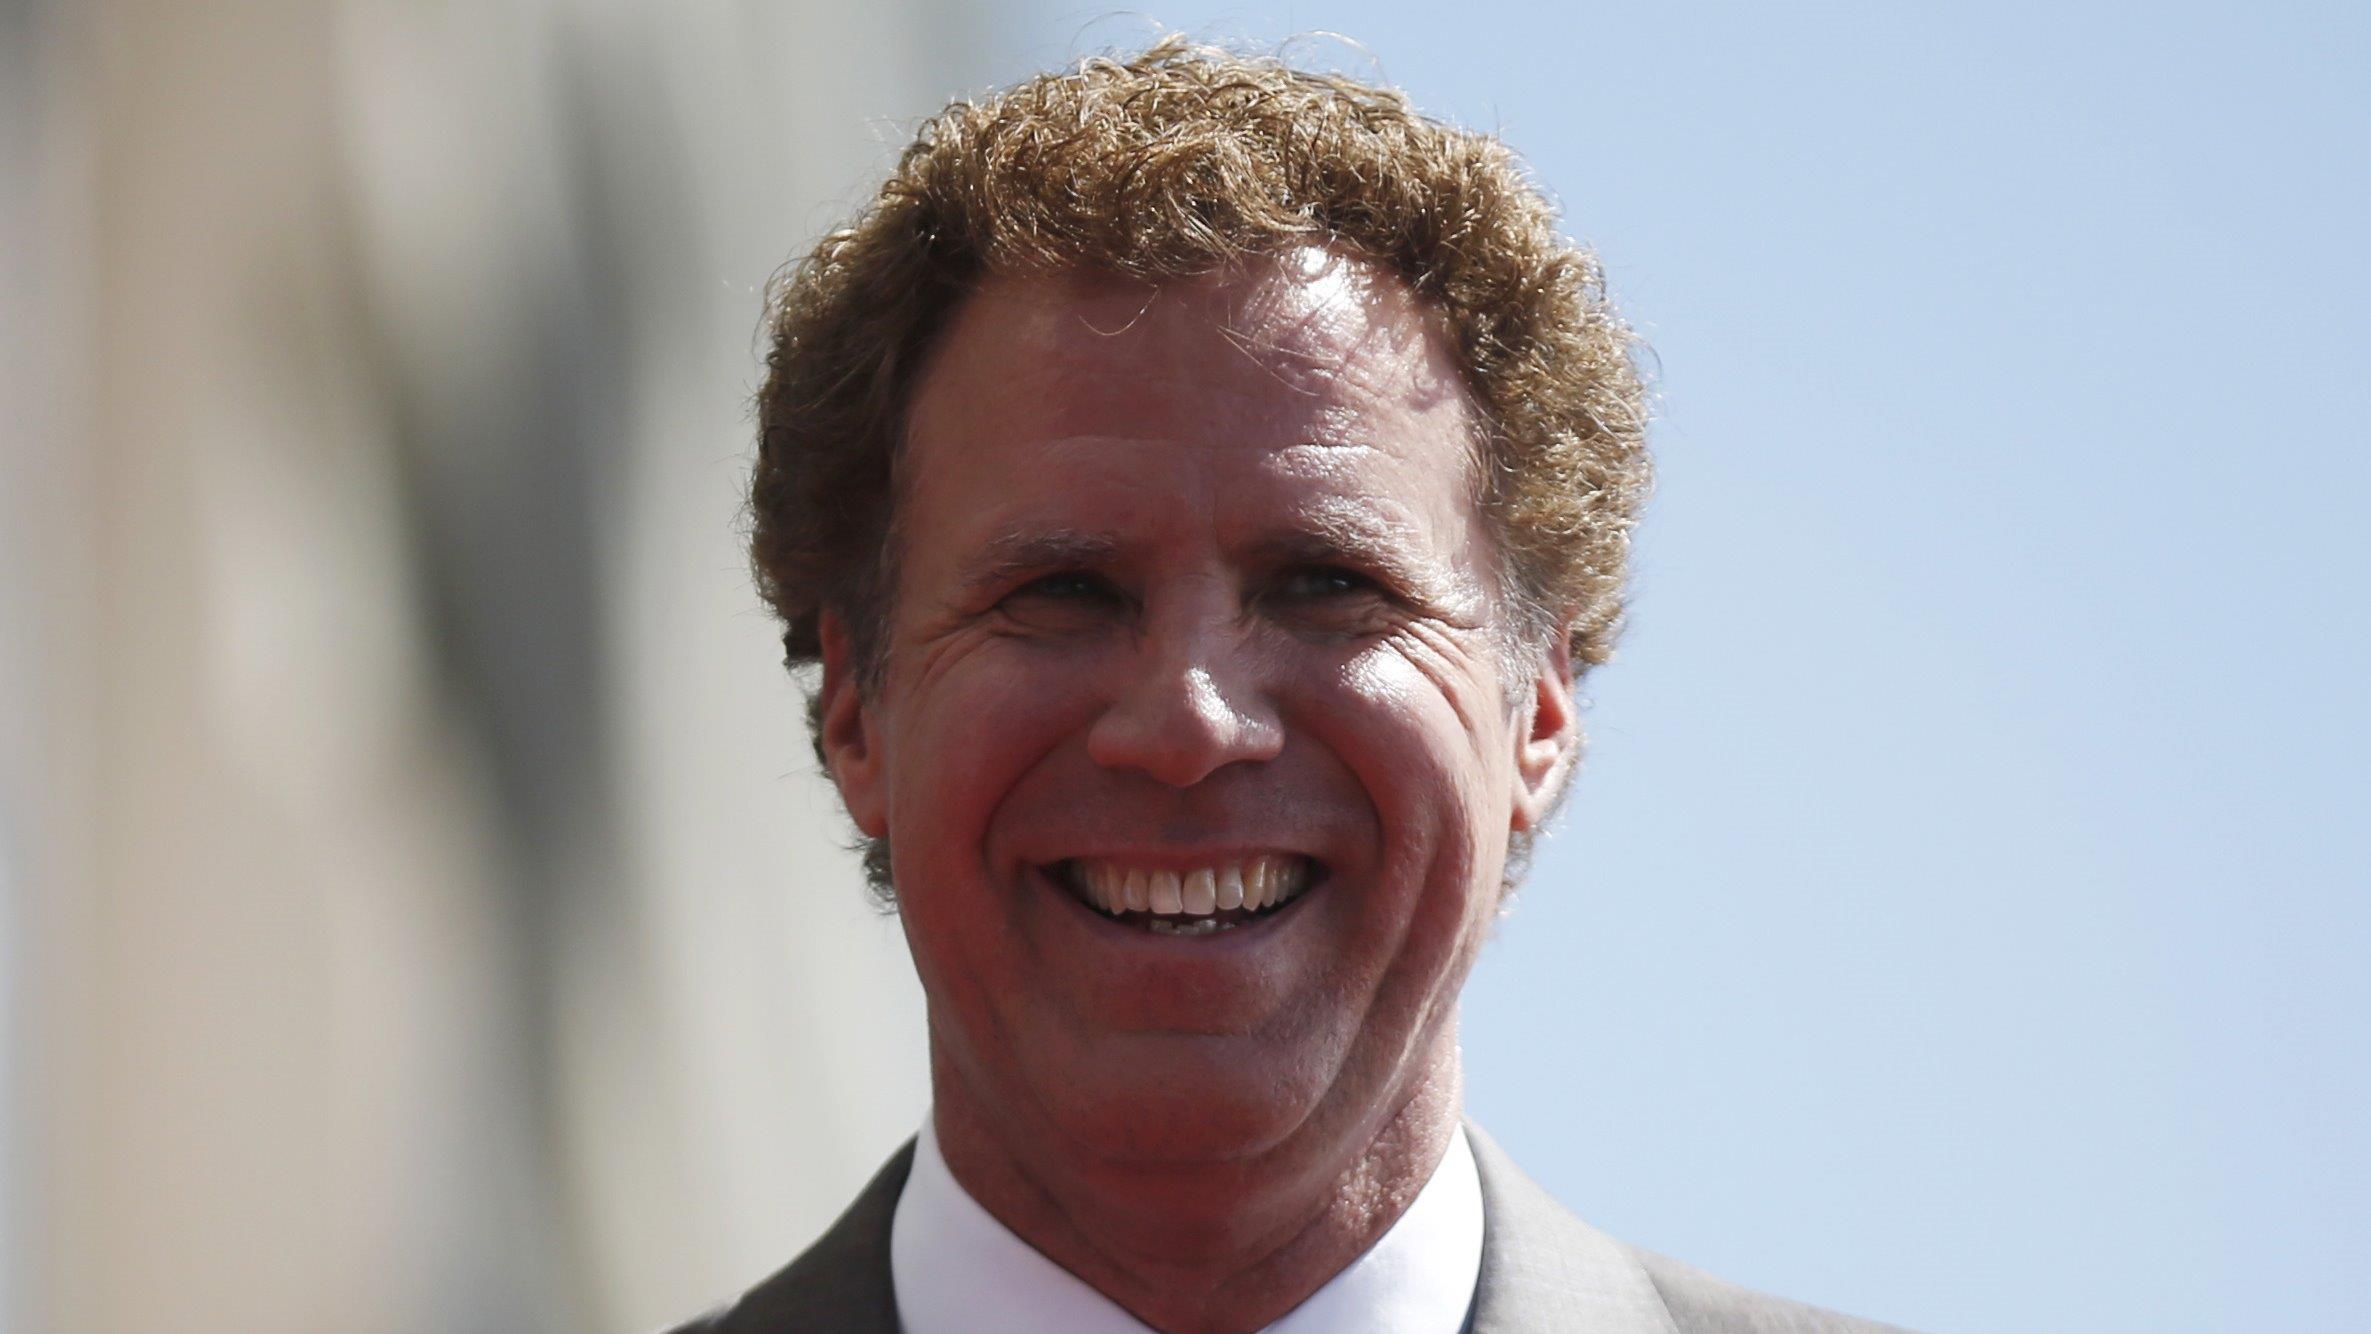 Actor Joe Piscopo on whether Will Ferrell should play Ronald Reagan in a new movie. 